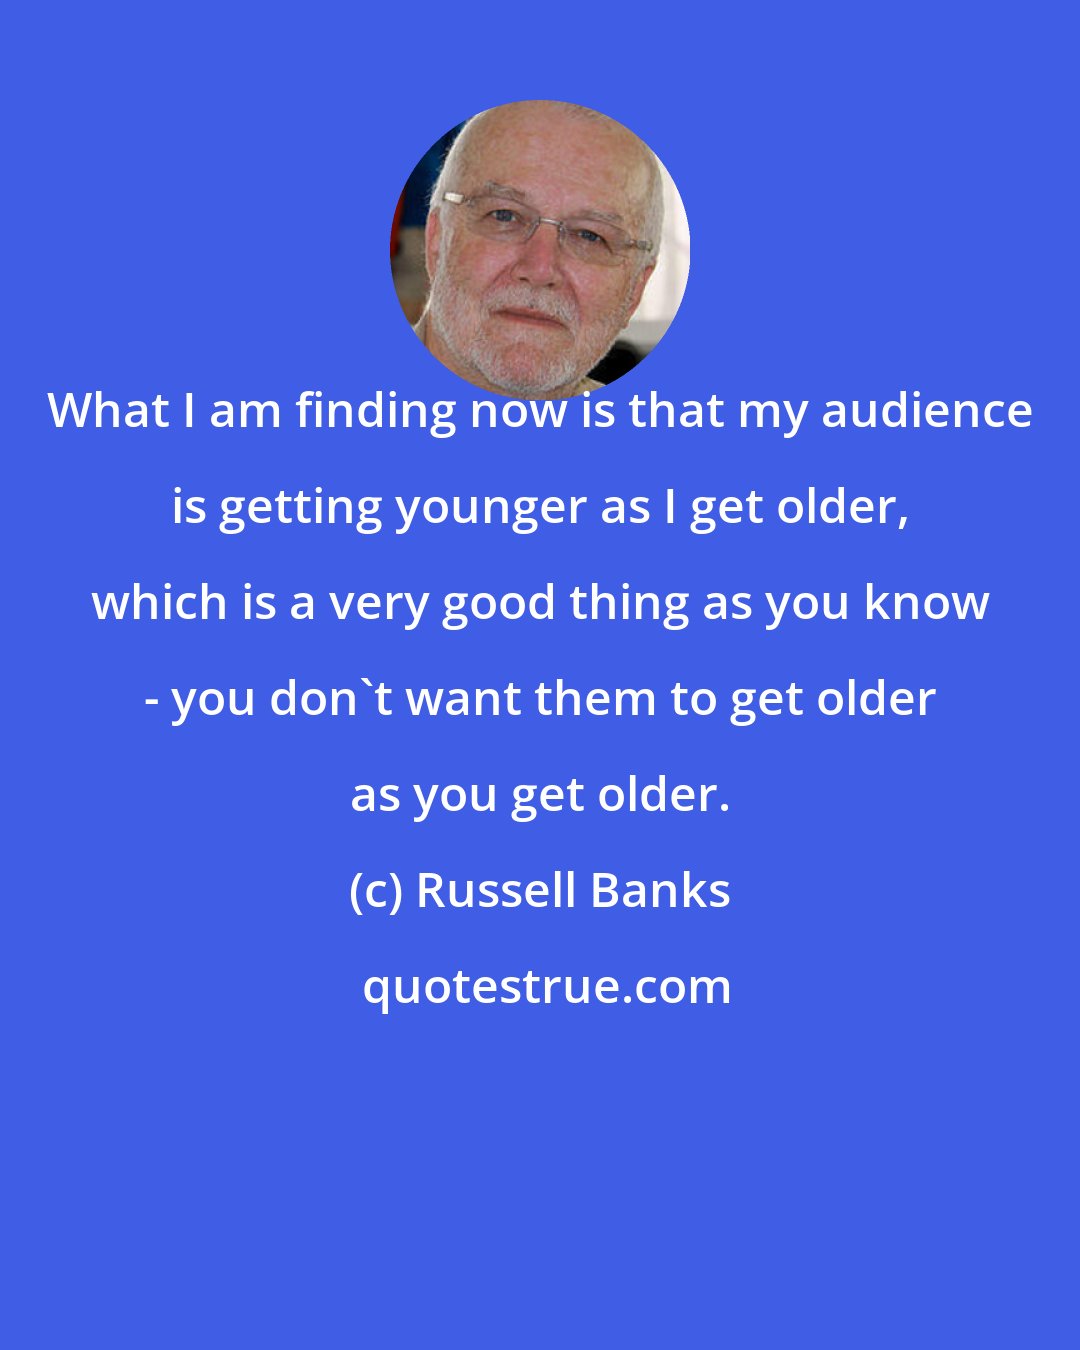 Russell Banks: What I am finding now is that my audience is getting younger as I get older, which is a very good thing as you know - you don't want them to get older as you get older.